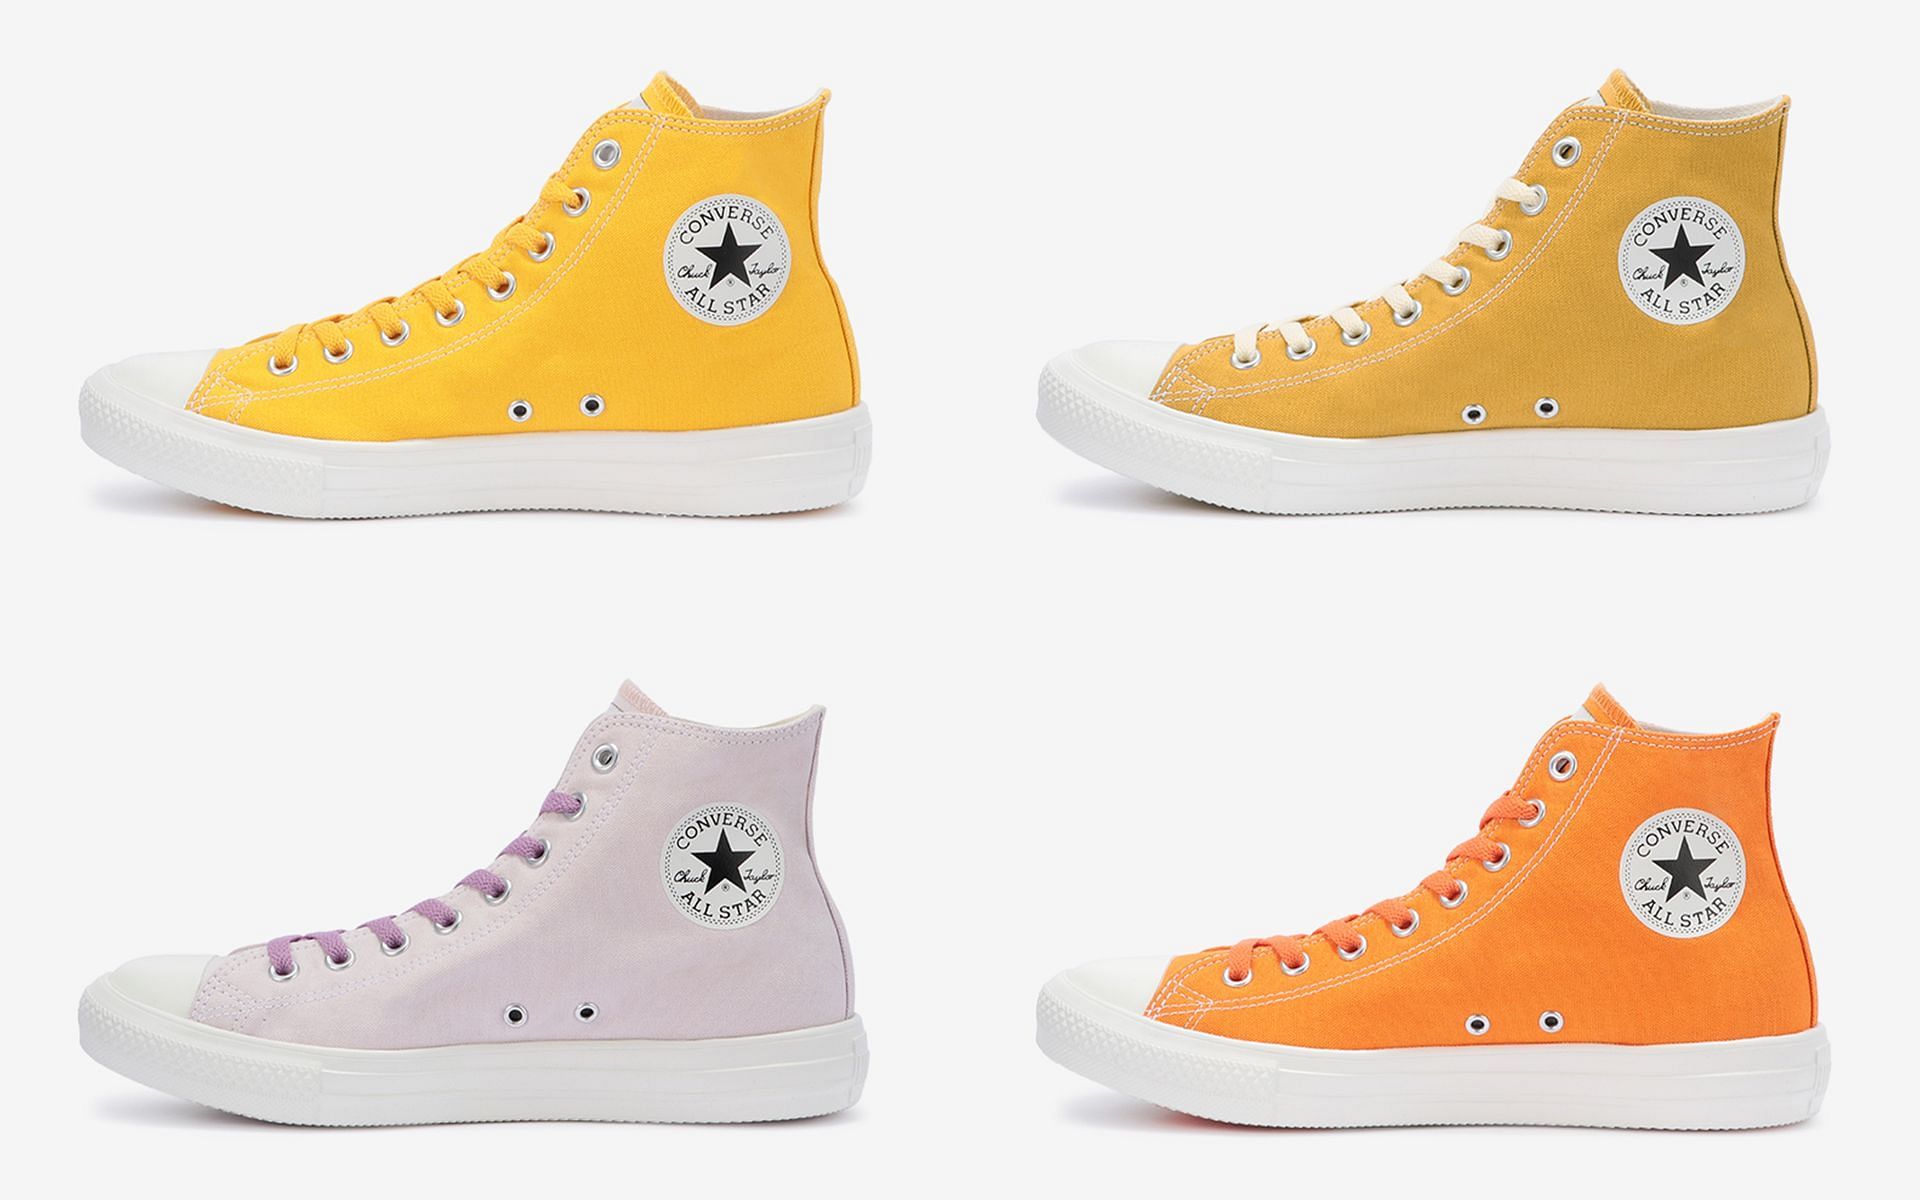 Pokemon X Converse sneakers: Price, where to buy, and more details ...